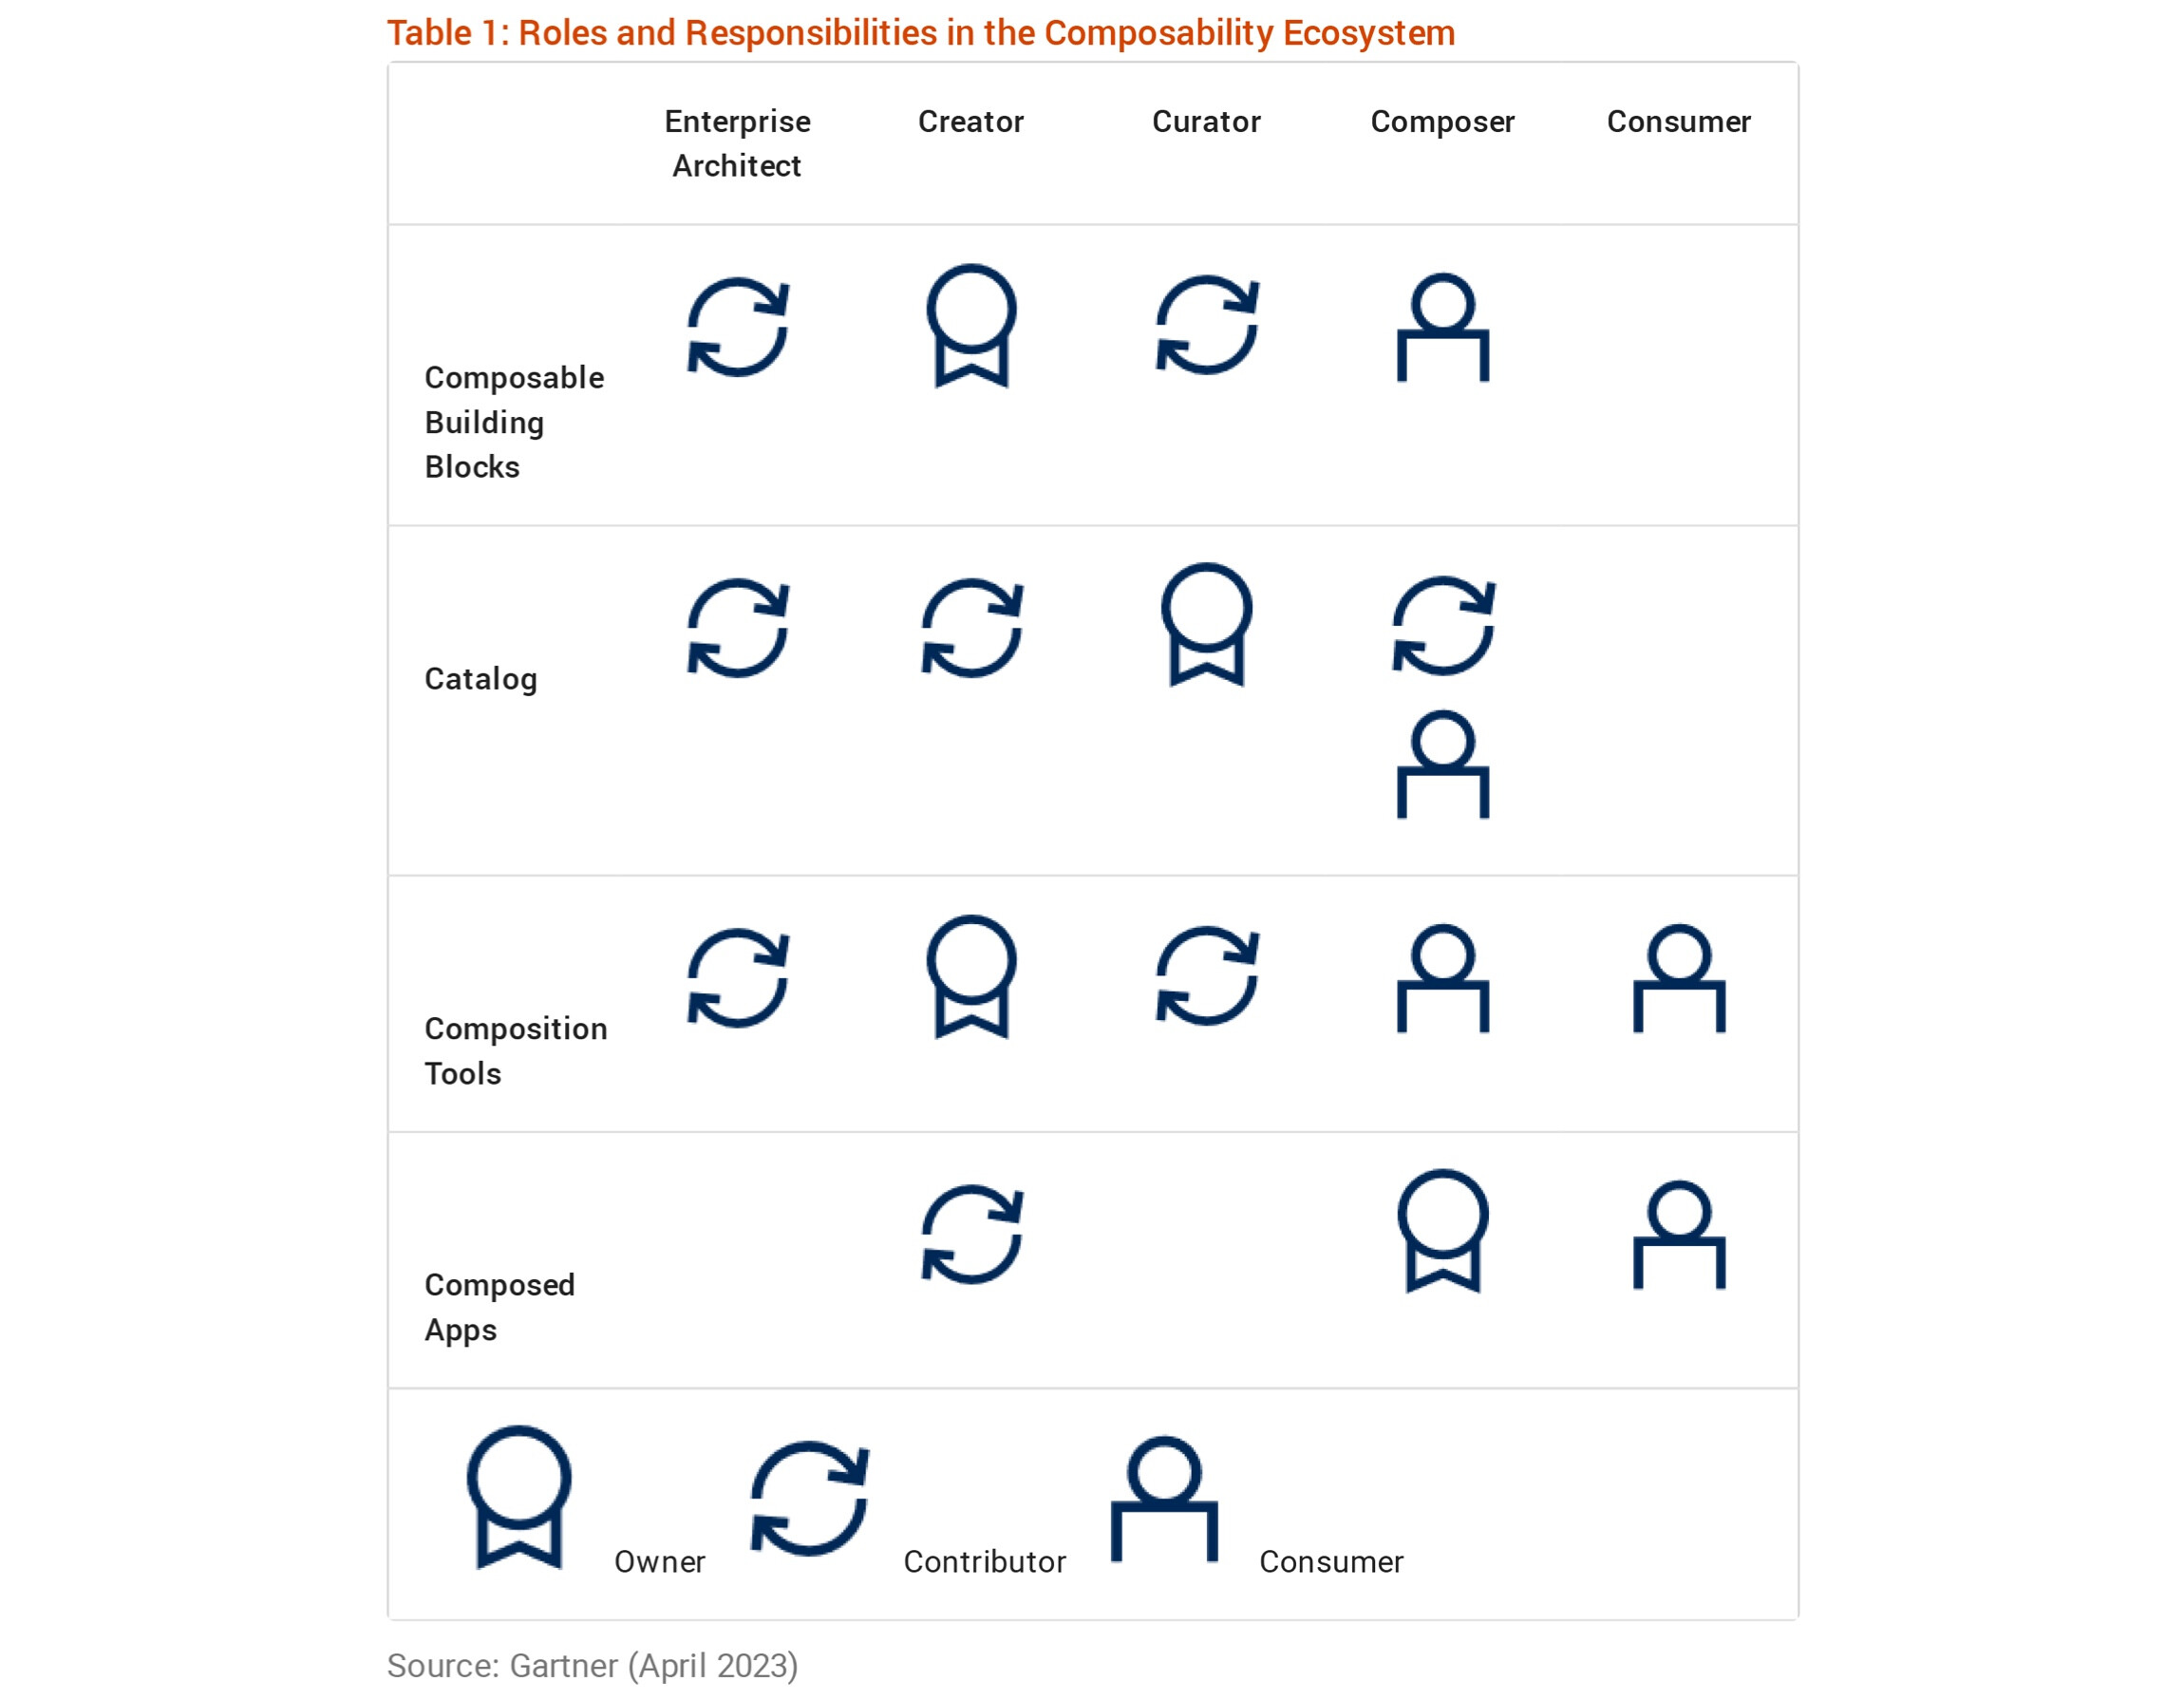 Roles and responsibilities in the composable ecosystem